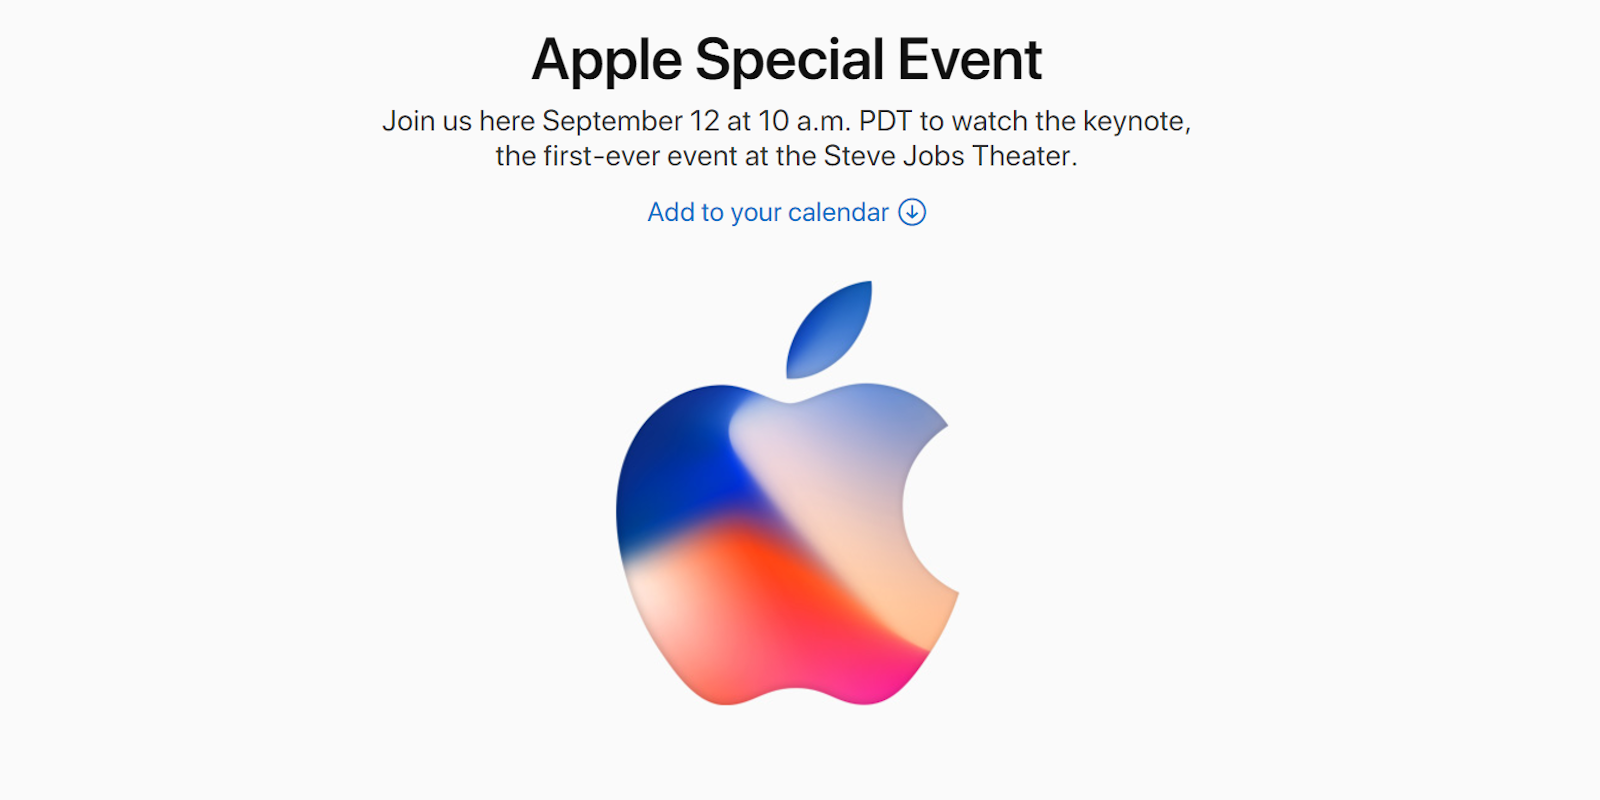 apple event 2017: How to watch the Apple iPhone Event